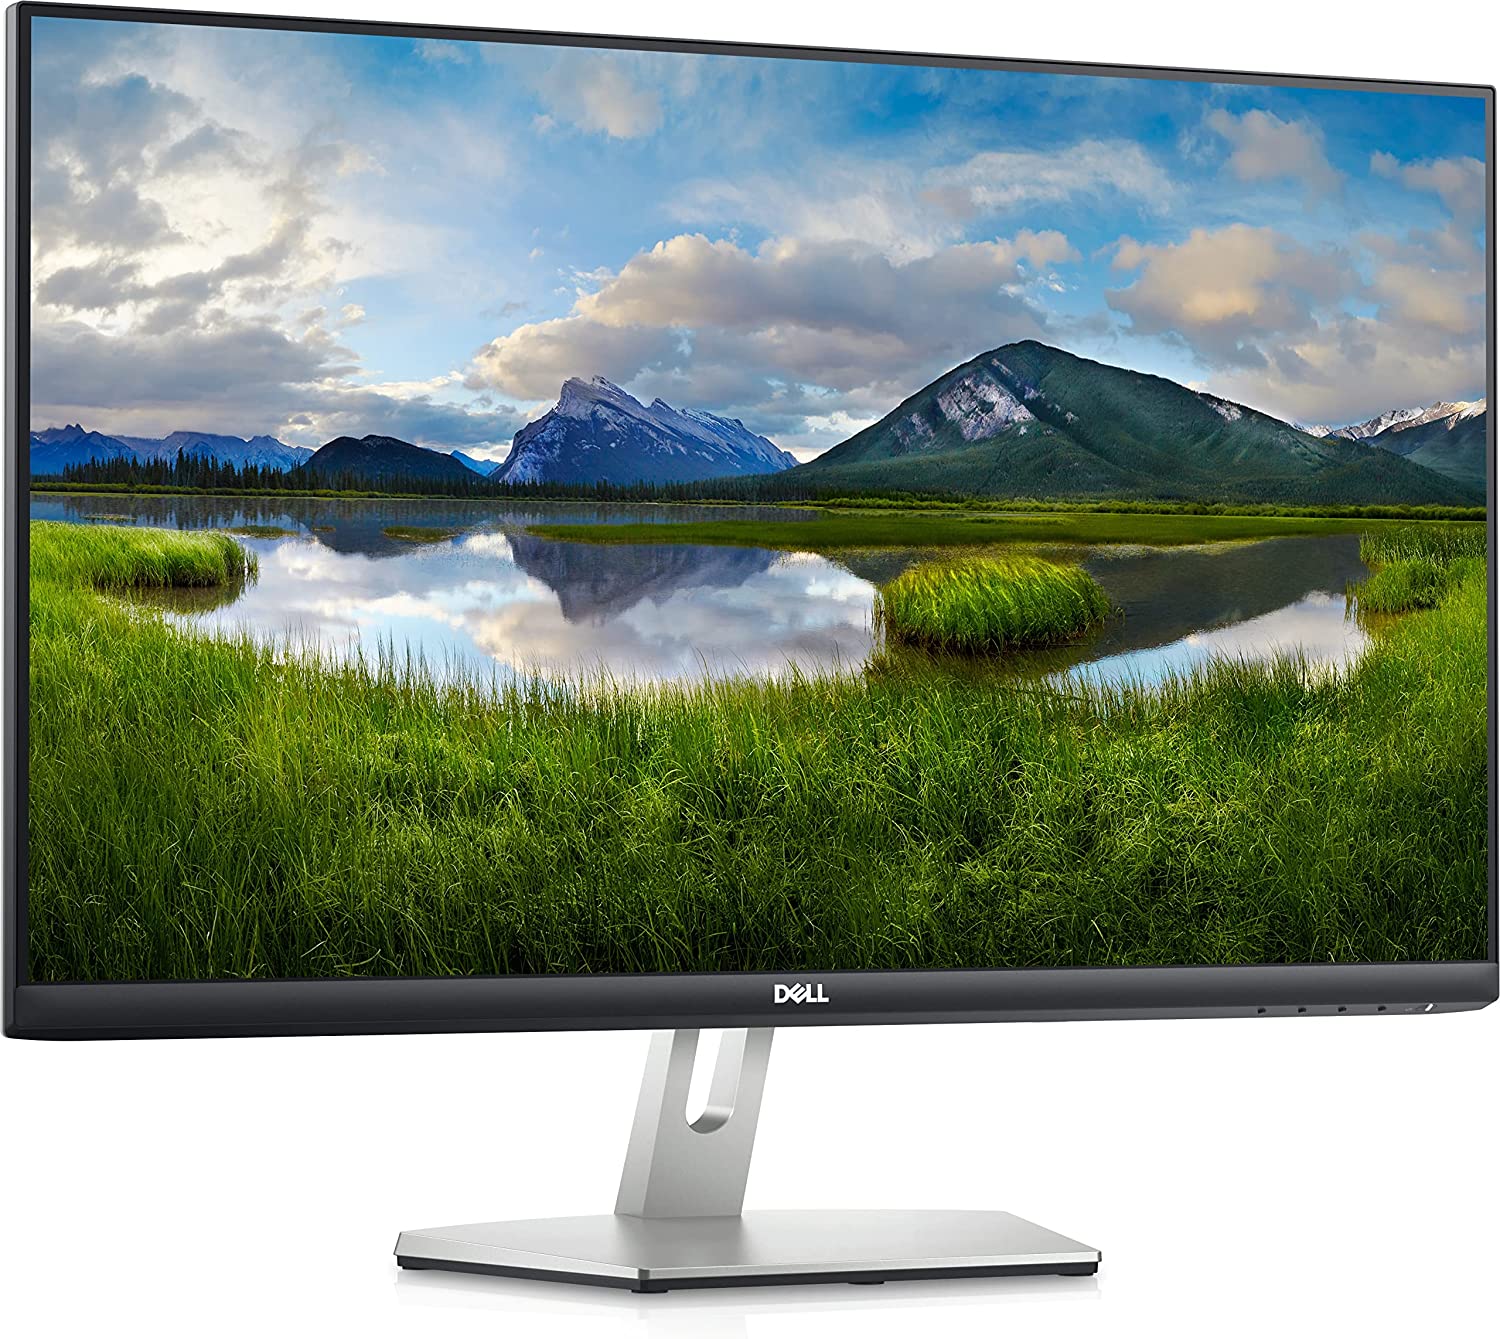 Dell 27 Monitor S2721Hn In Plane Switching IPS, Flicker Free Screen With Comfort View, Full HD 1080P 1920 X 1080 At 75 Hz With Amd Free Sync, With Dual HDMI Ports, 3 Sided Ultrathin, Grey